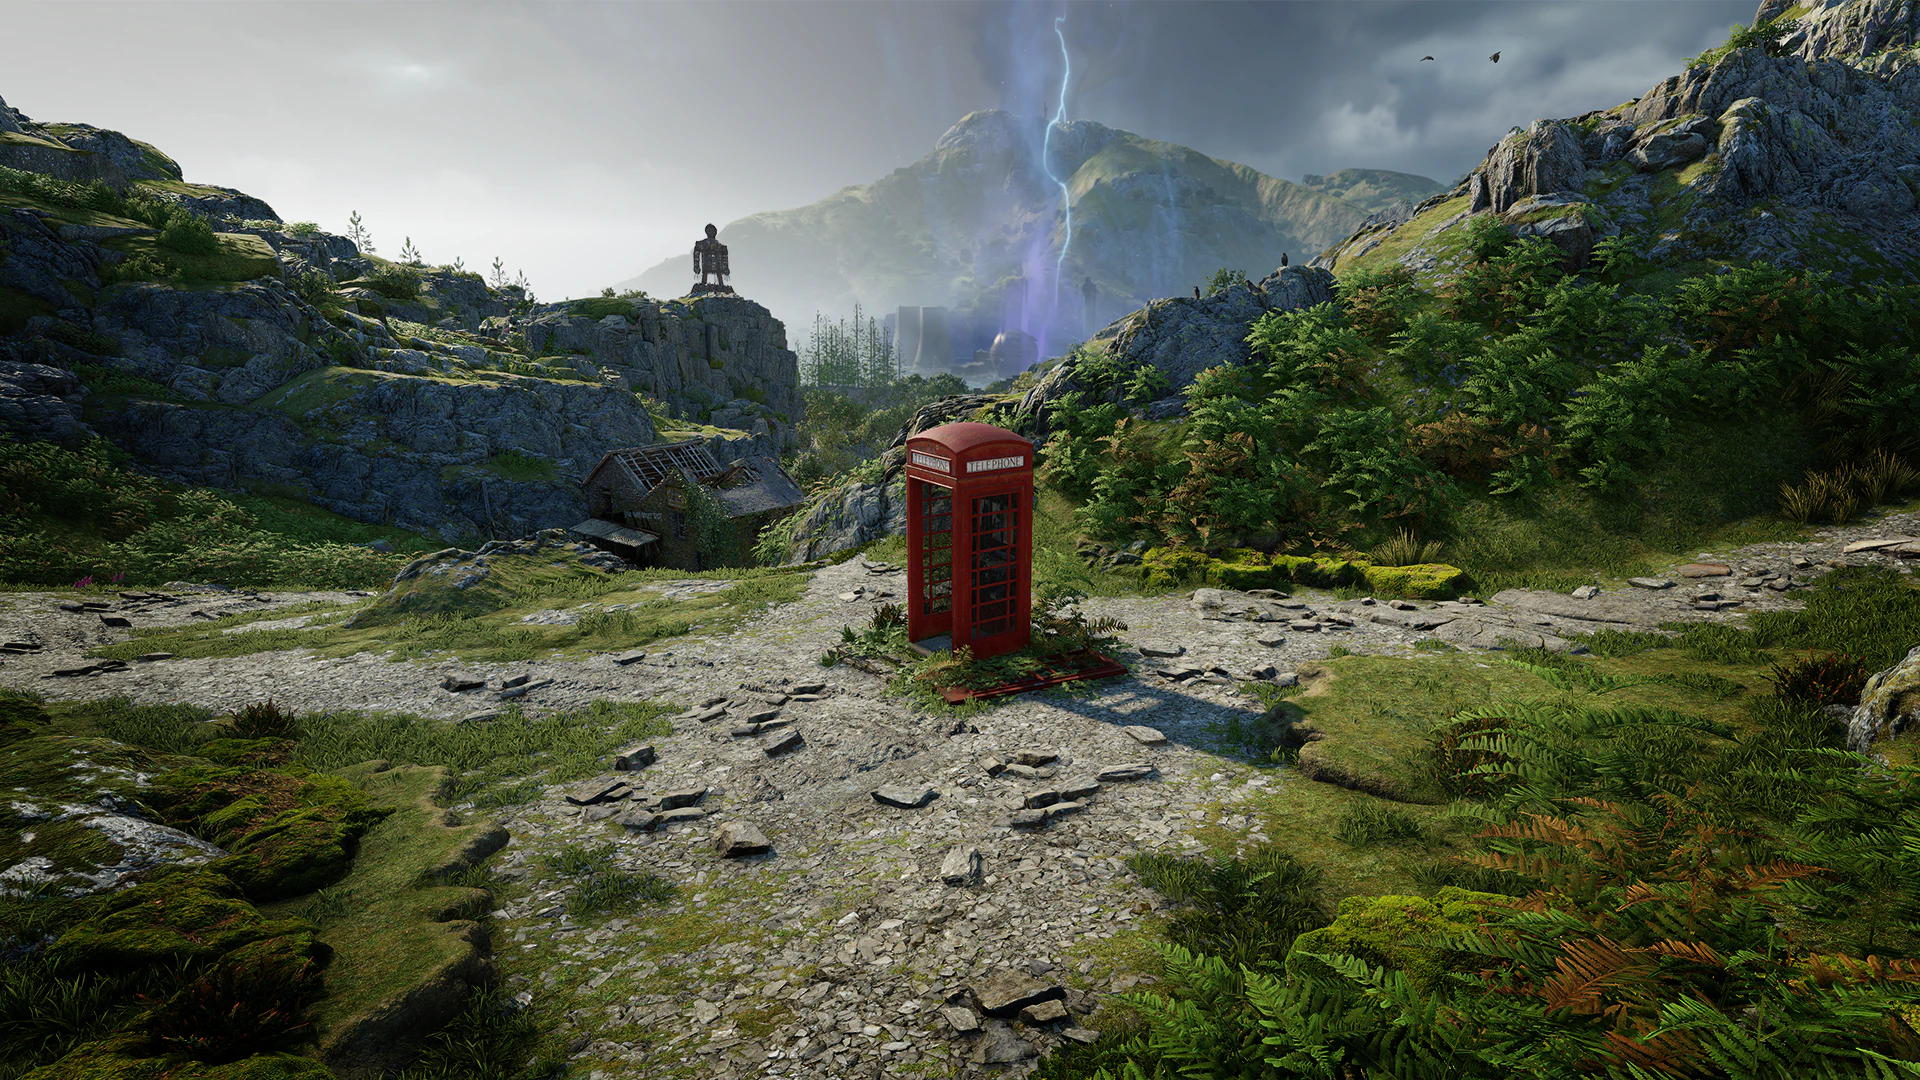 Key art showing an old English postbox in the foreground of a dystopian, countryside landscape.